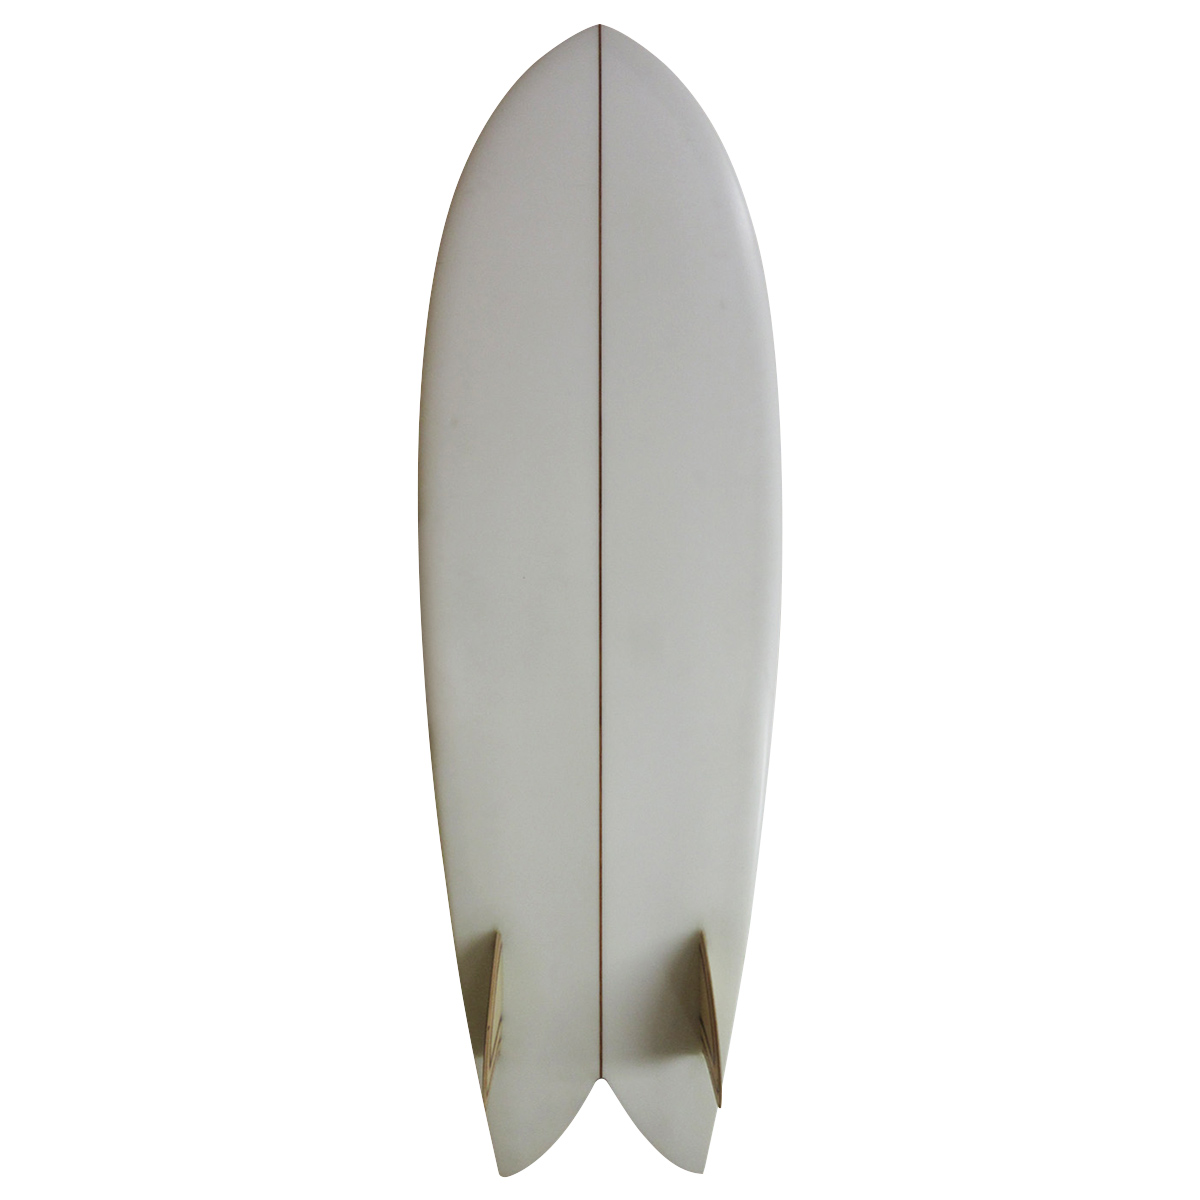 TANNER / SCOUT FISH PROTO 5`10